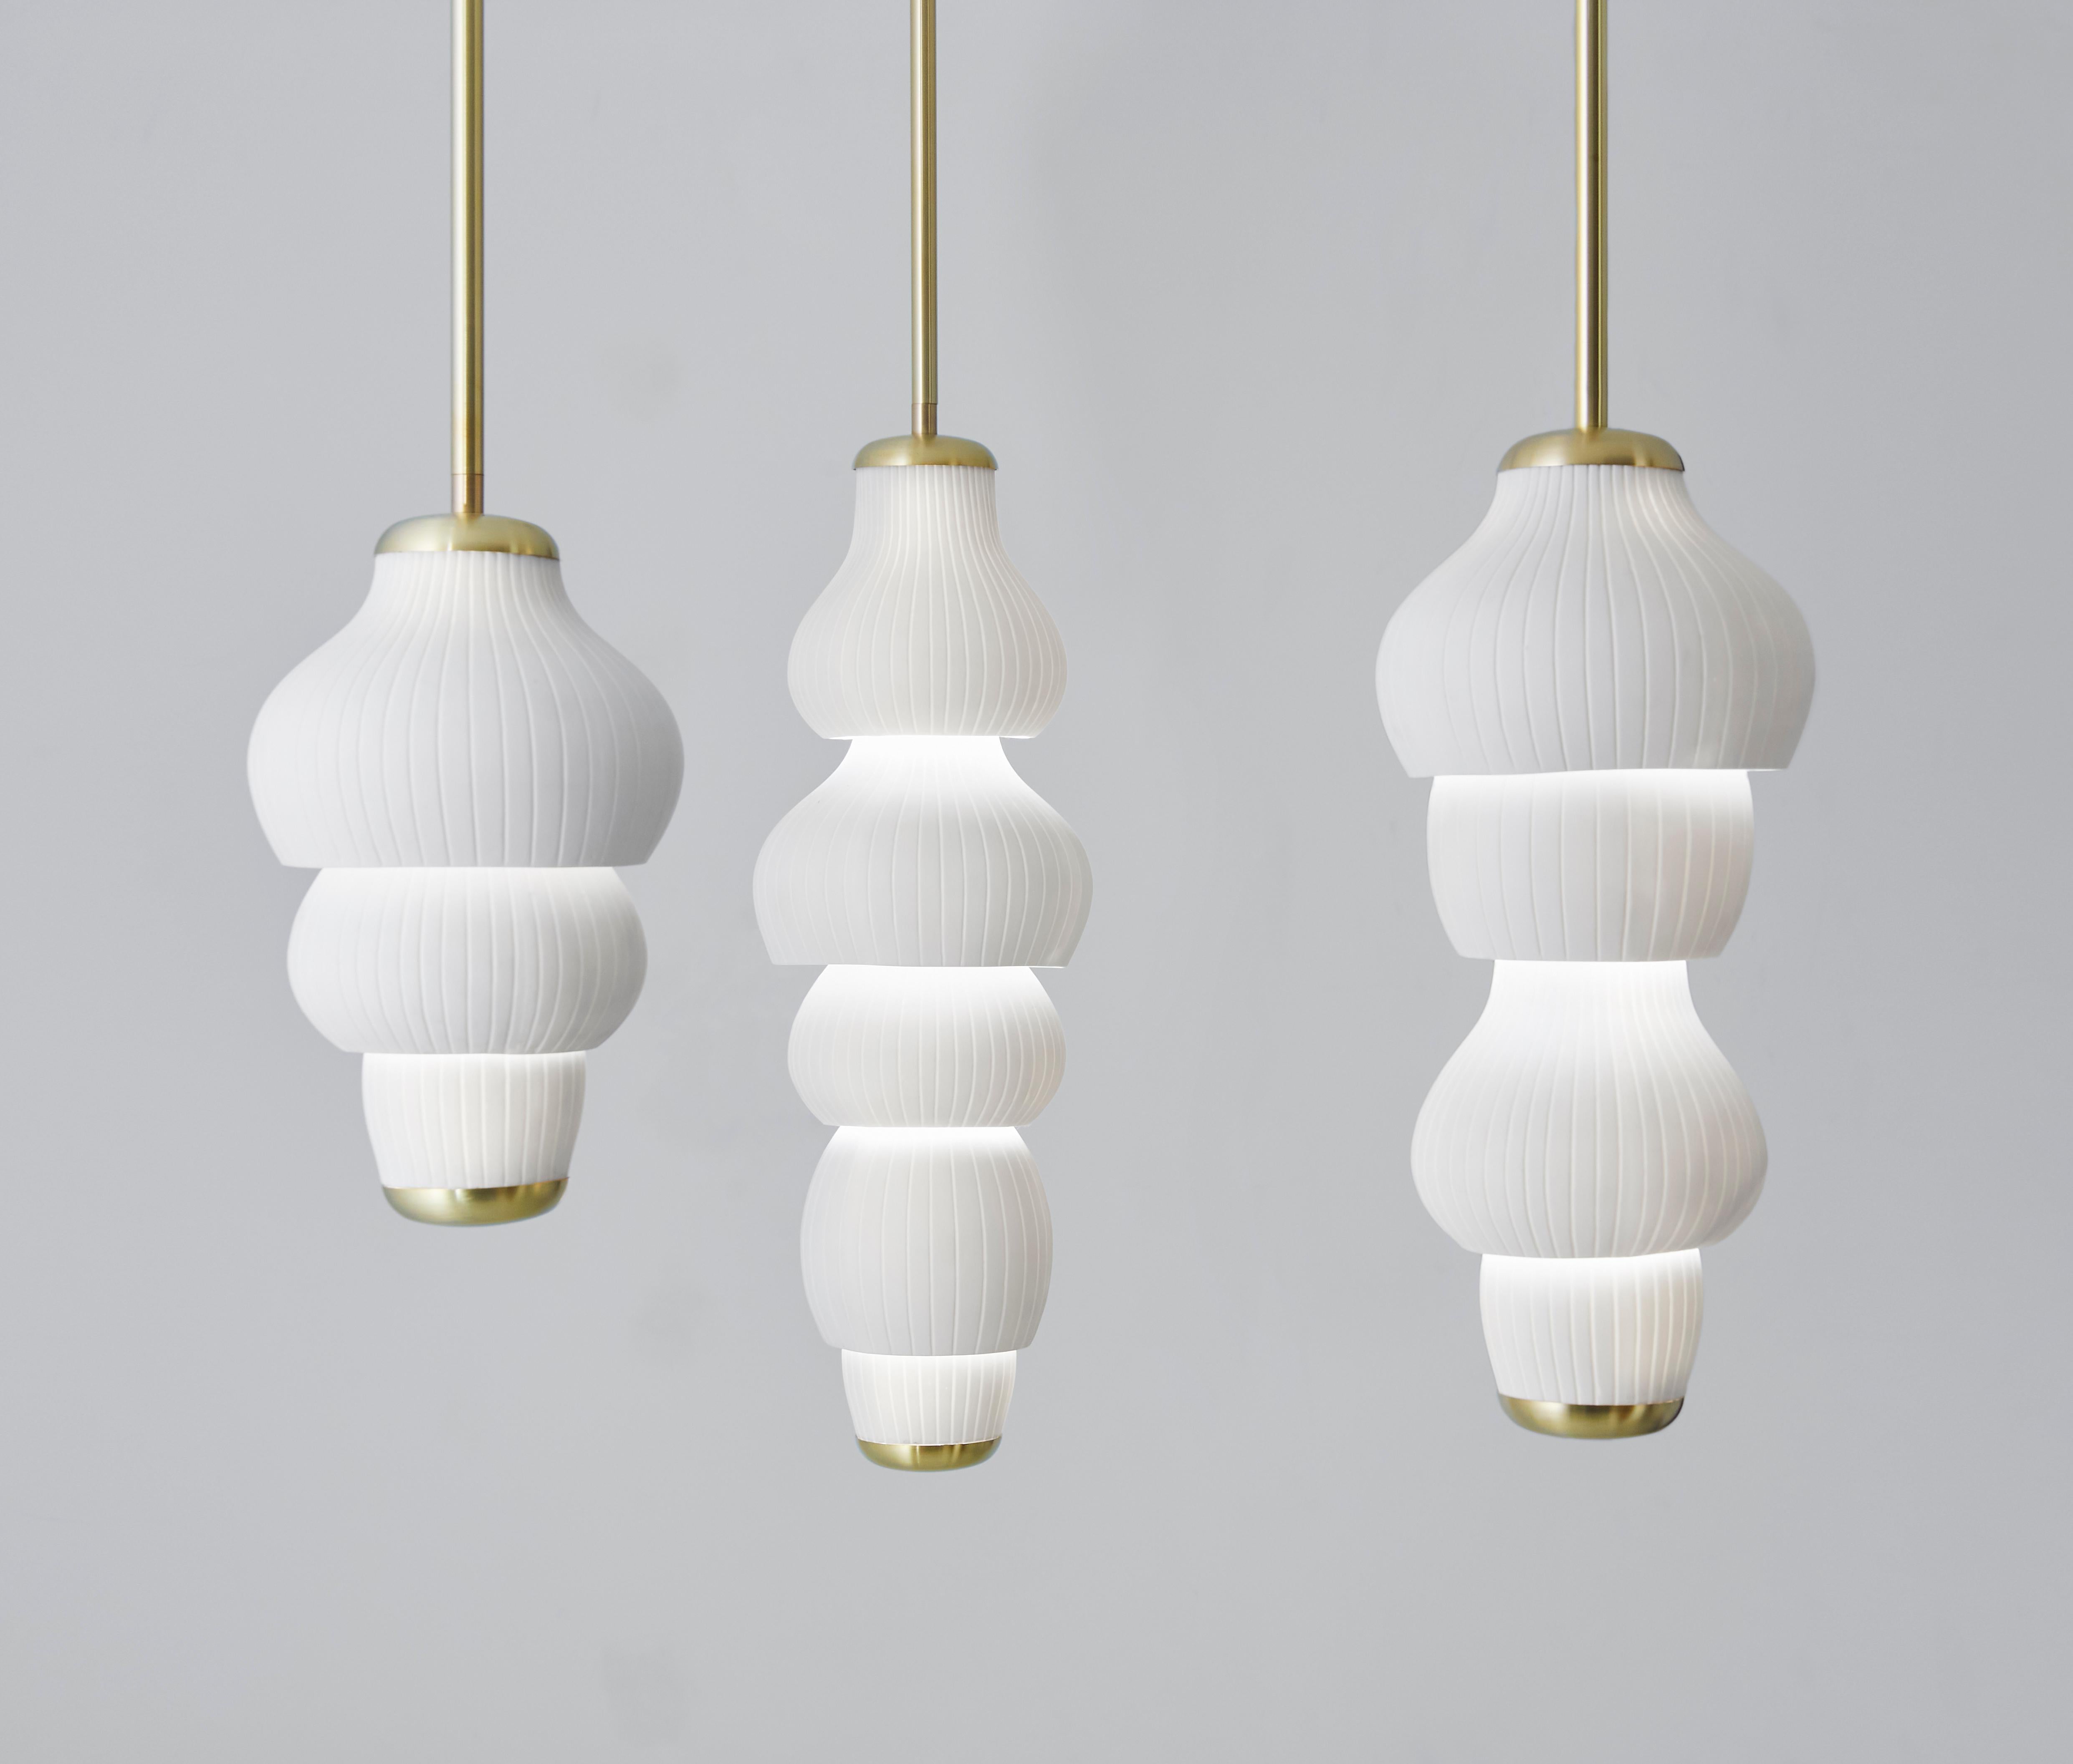 Set of 3 Glaïeul pendant Light by Mydriaz
Dimensions: D26x H100 cm each one
Materials: Brushed brass, pale gold finish, biscuit ceramic.
Adjustable measure.

All our lamps can be wired according to each country. If sold to the USA it will be